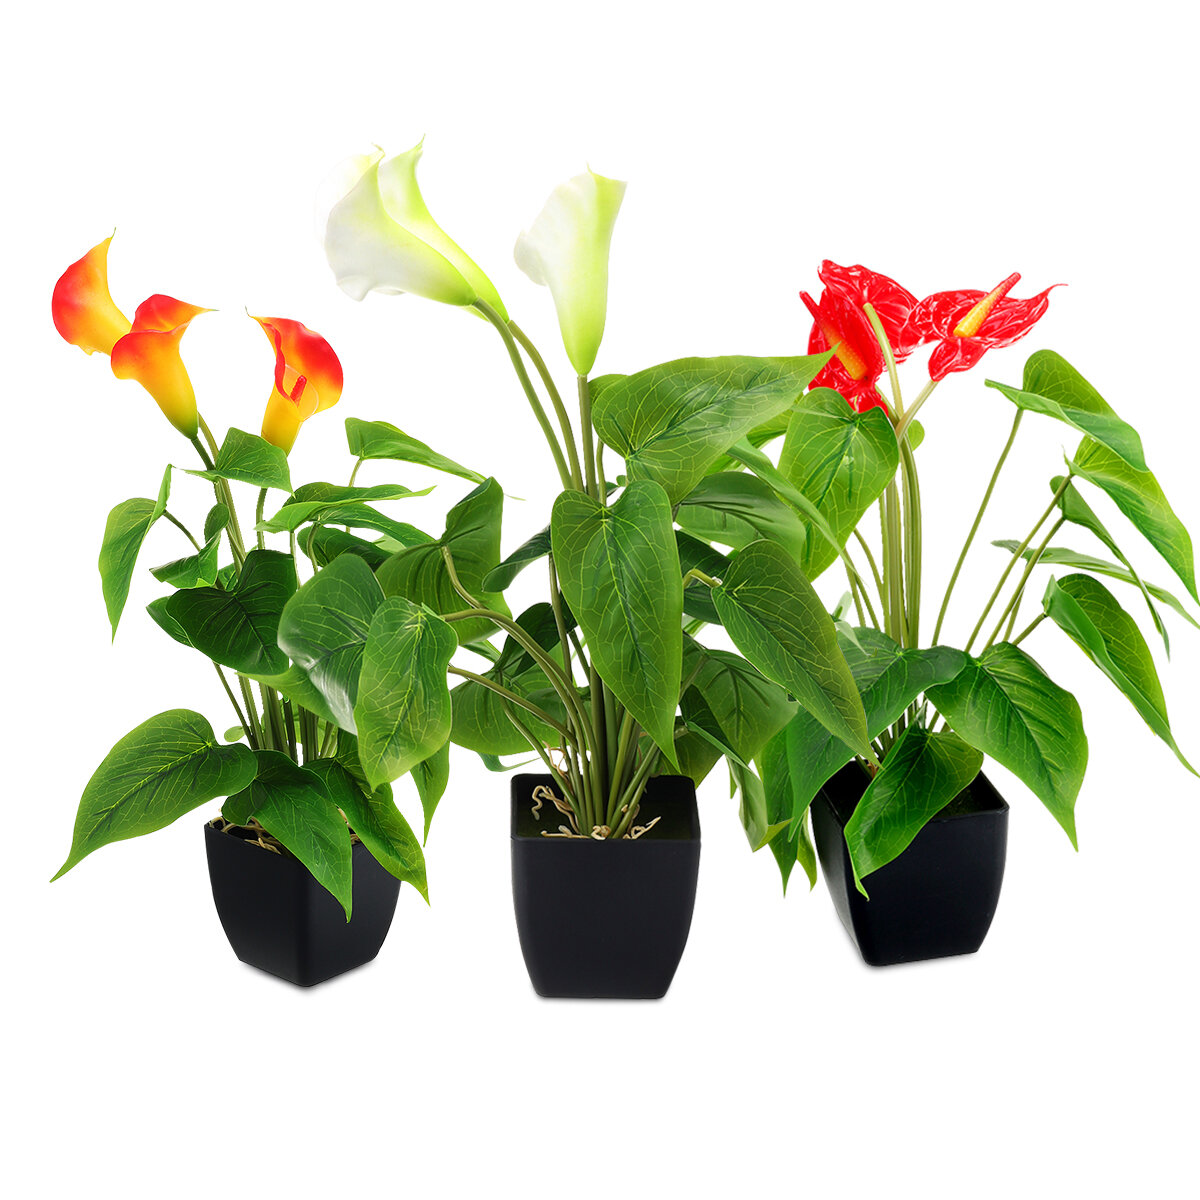 

Potted Simulation Plant Lifelike 25 Leaves Evergreen Artificial Plant Bush Potted Tree Flower Home Garden Office Decorat